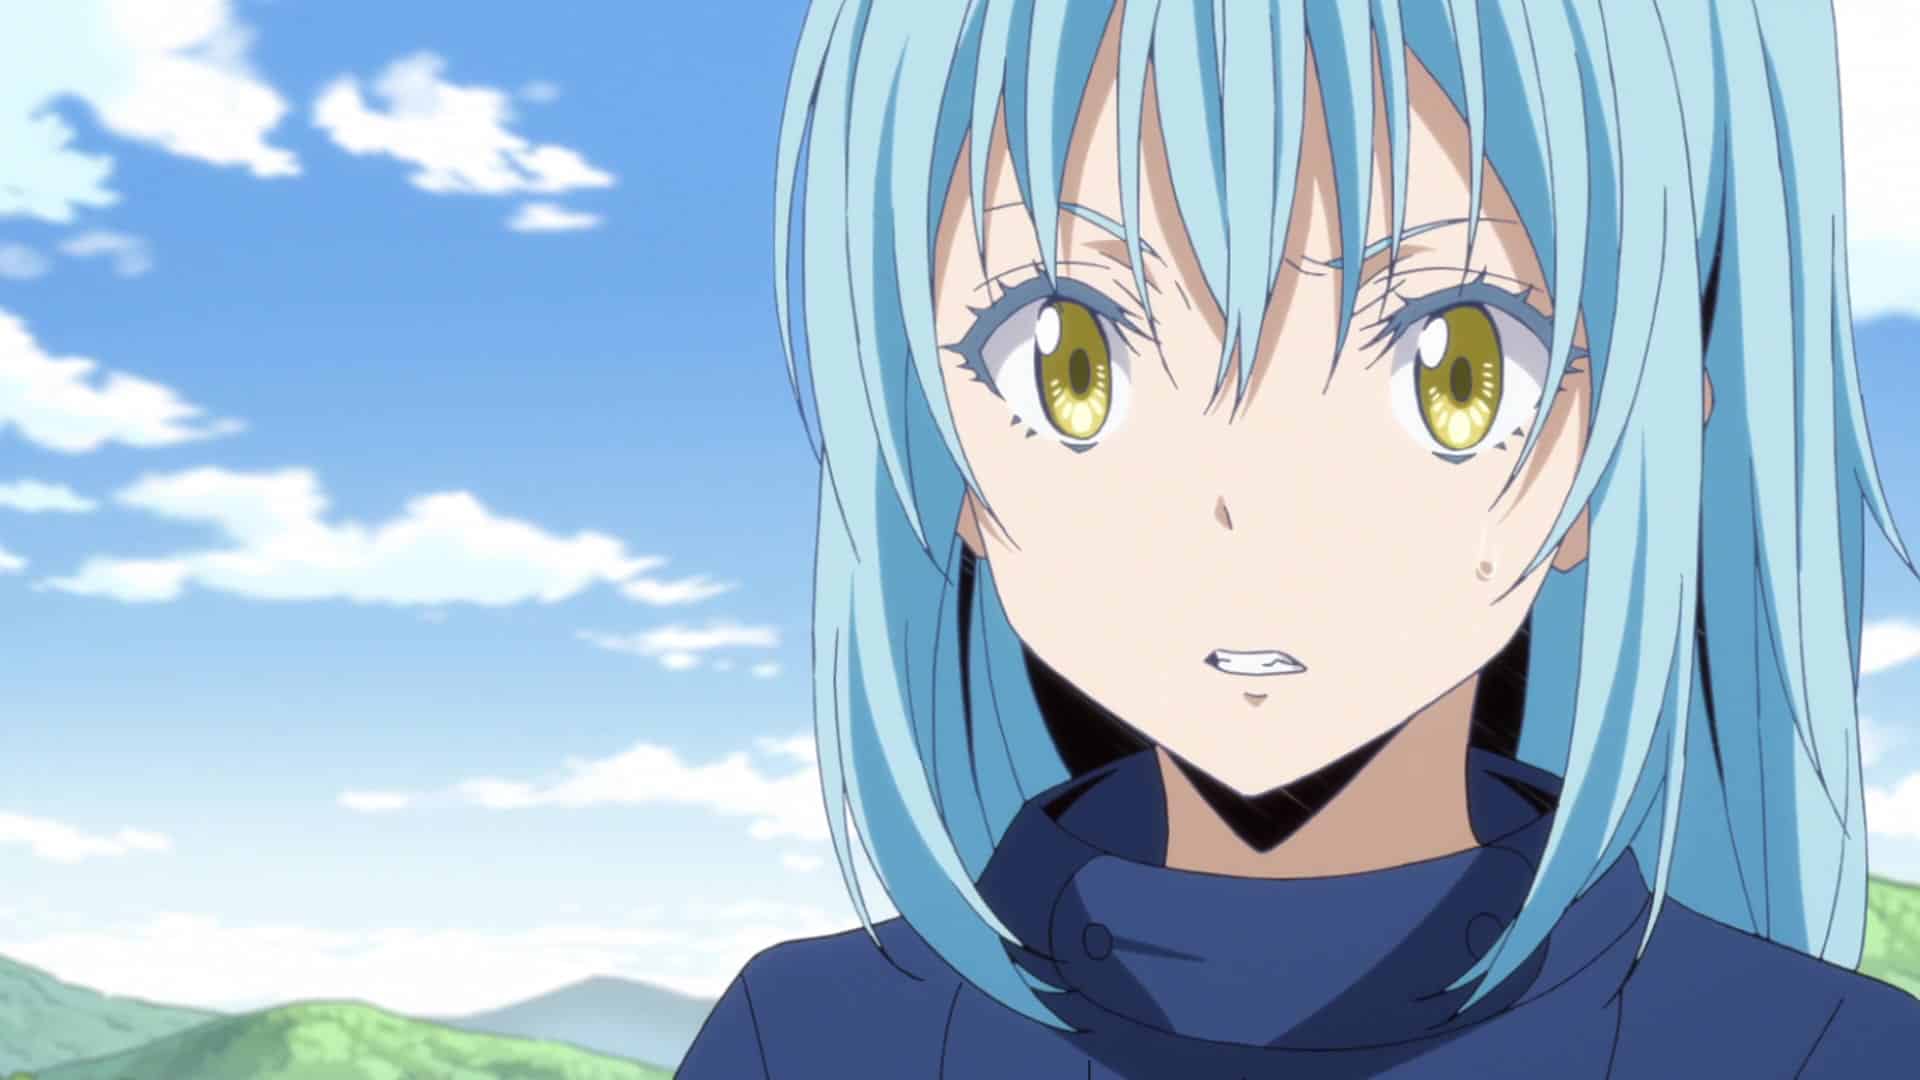 The Time I Got Reincarnated as a Slime